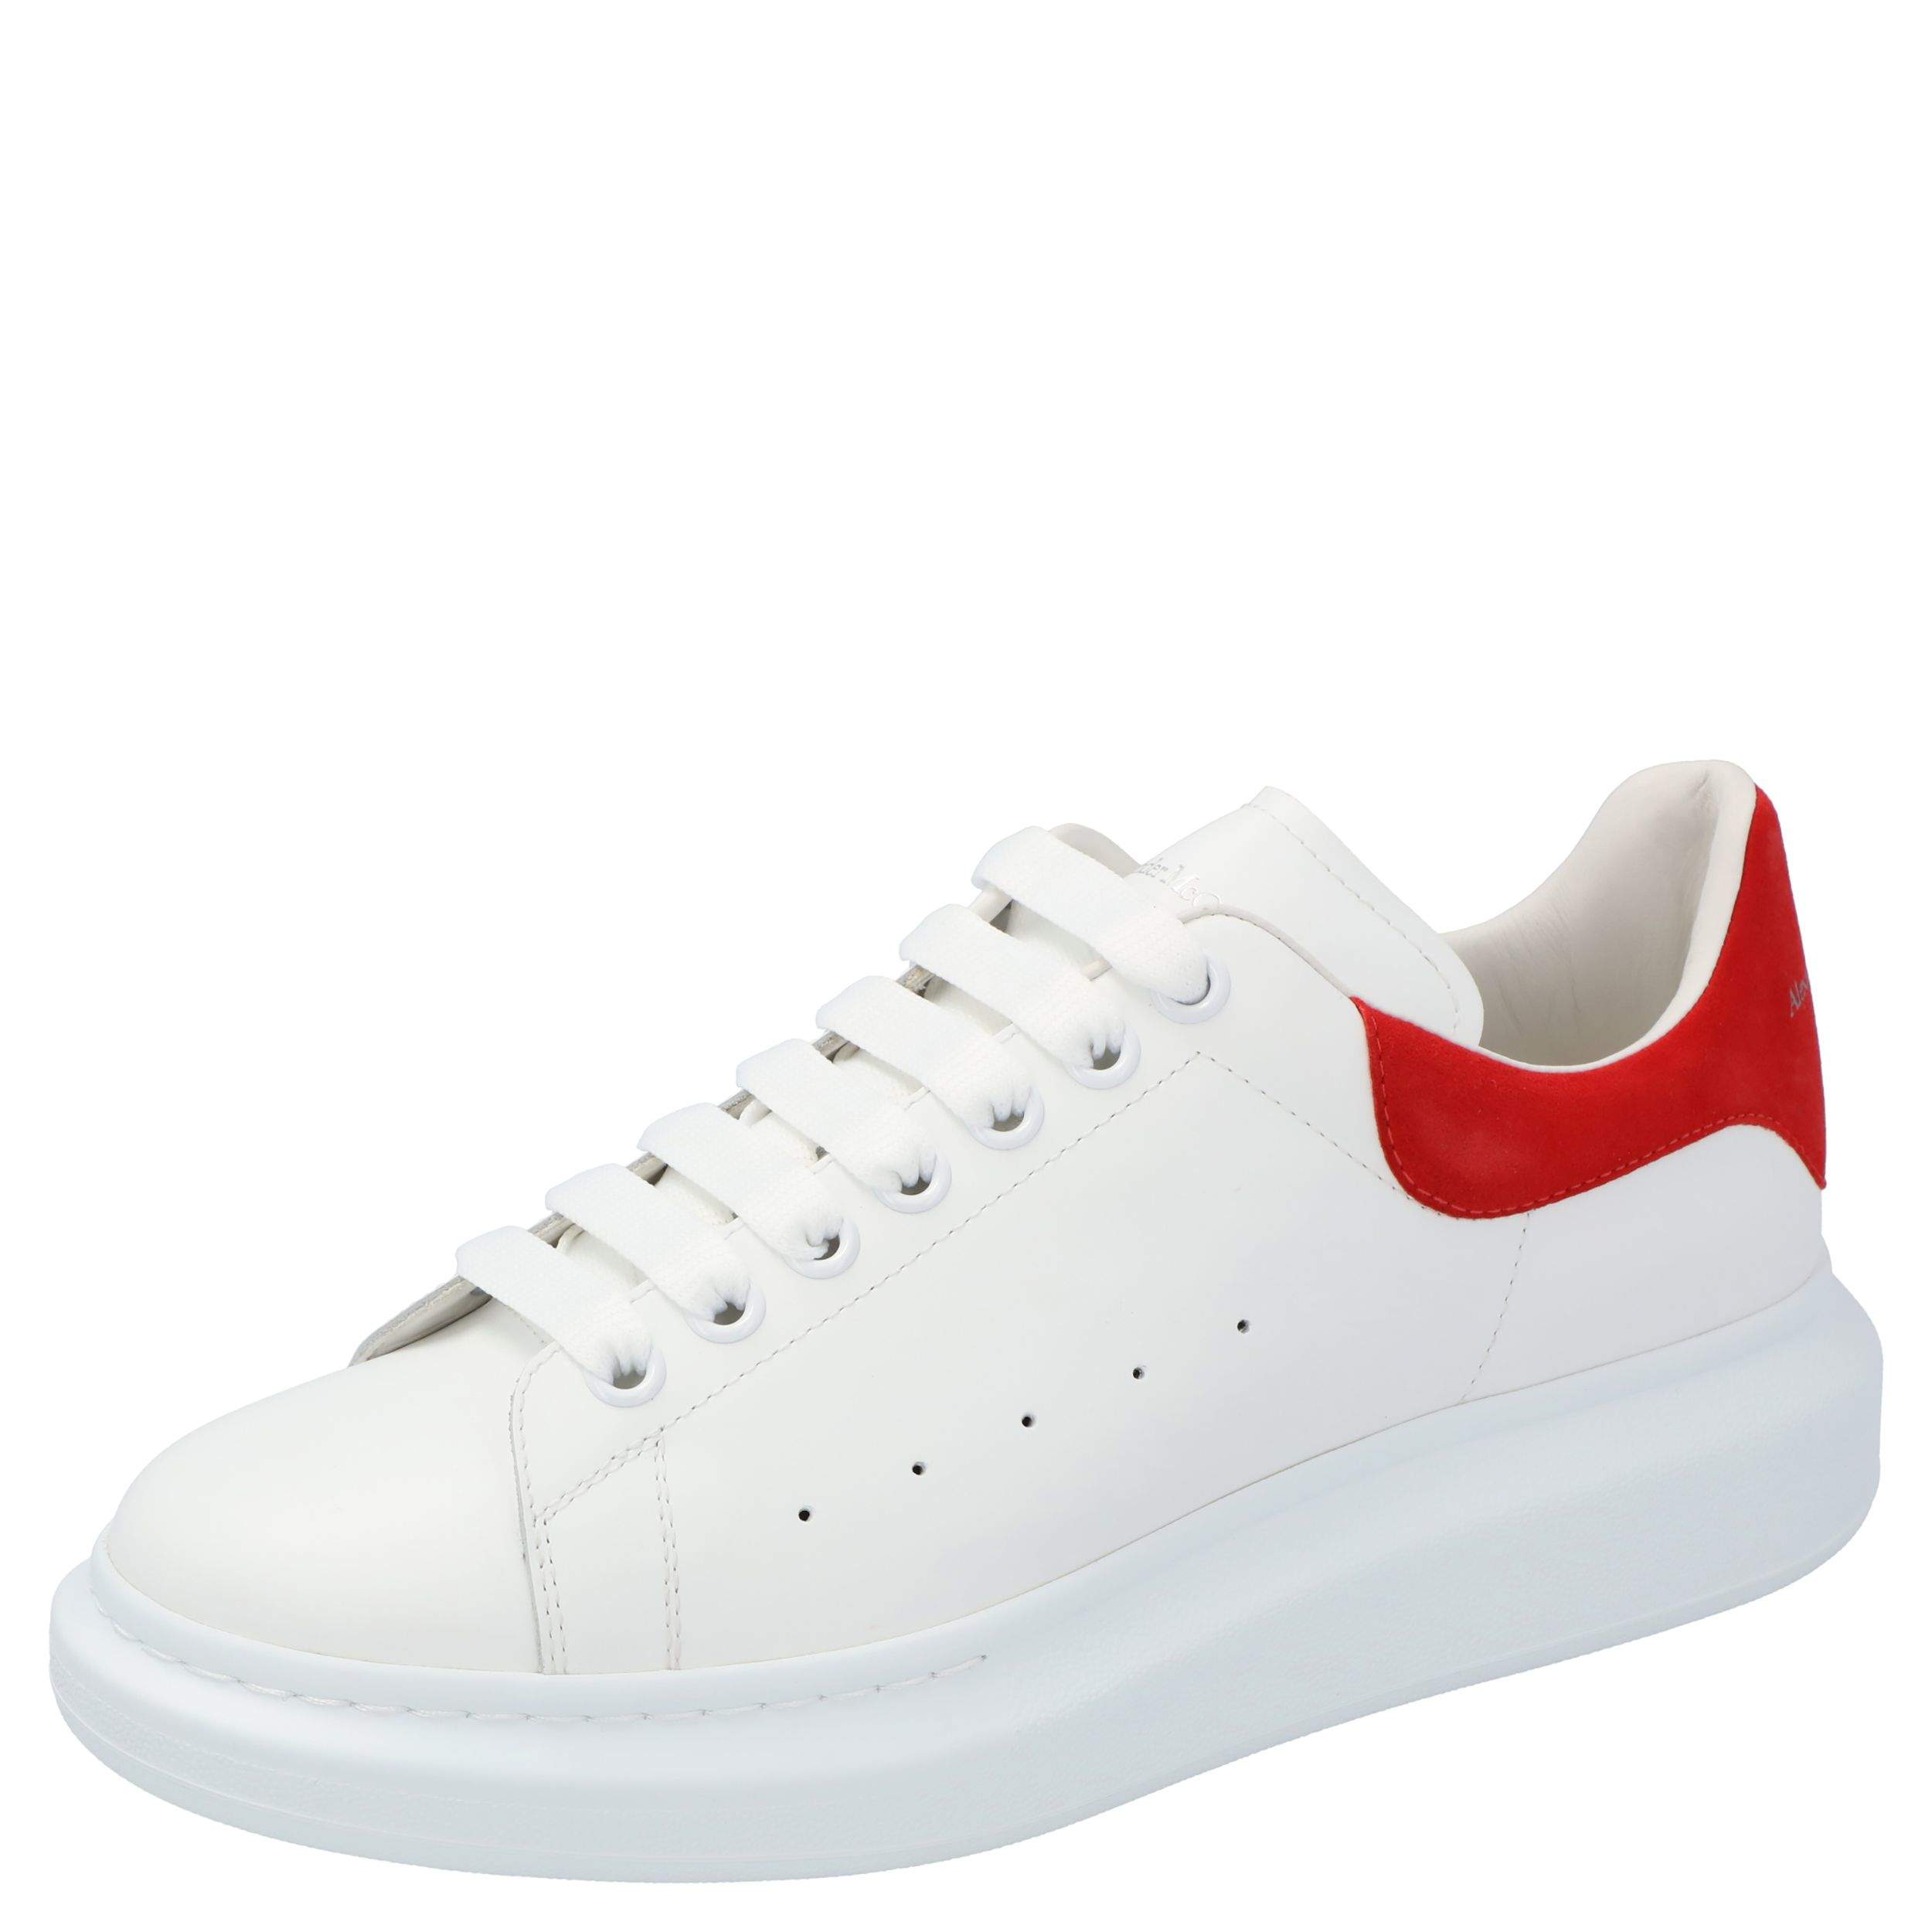 Alexander McQUEEN White & Red Sprayed Toe 'Oversized' Sneakers | INC STYLE